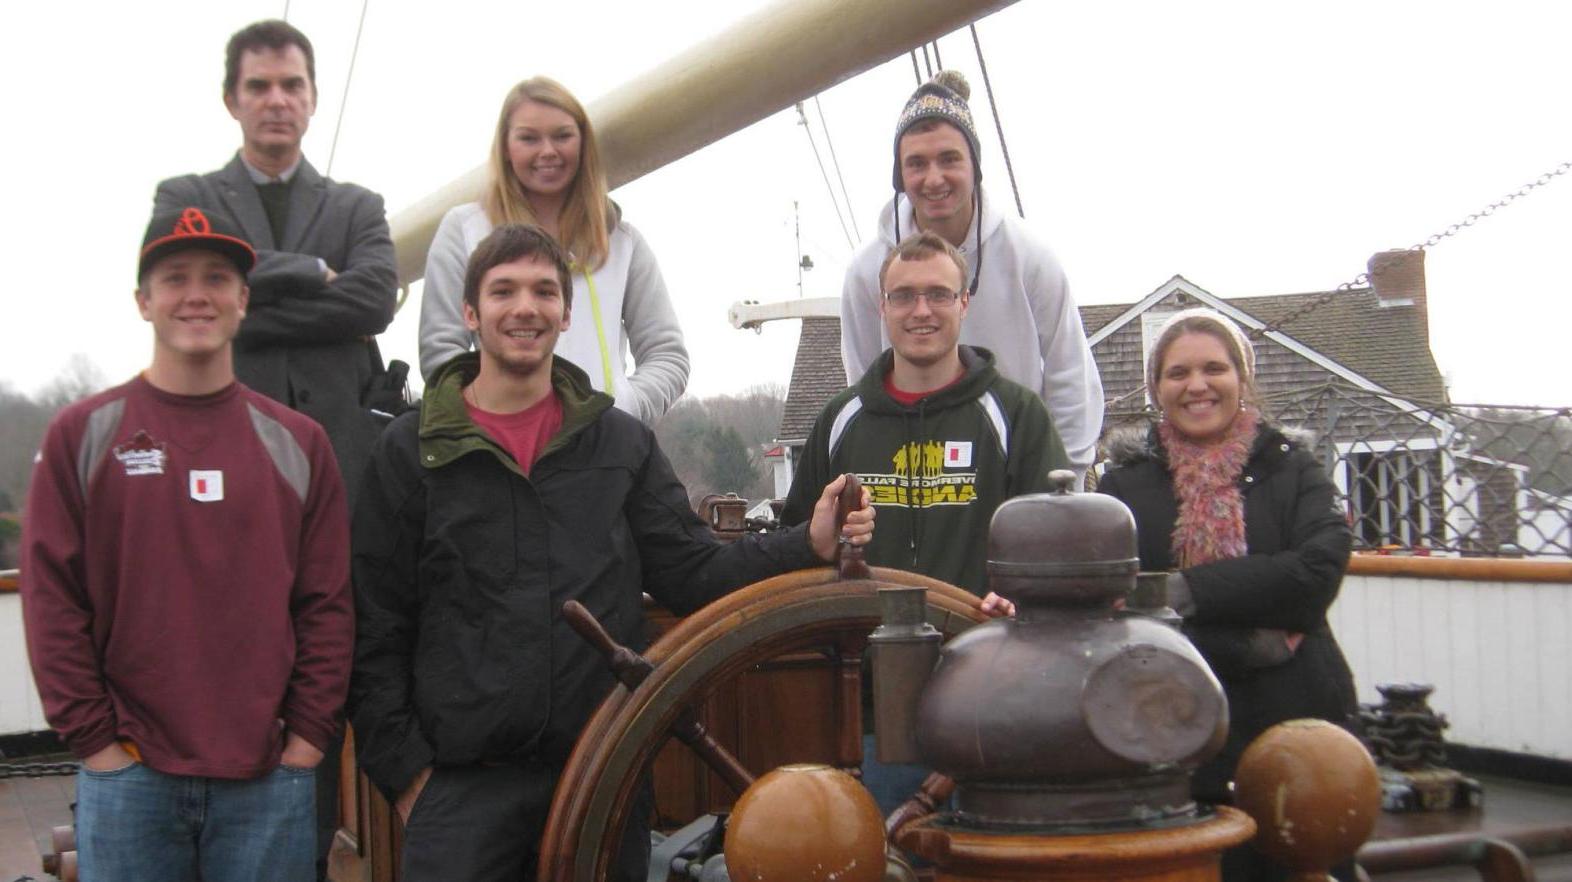 Students pose during a field trip to Mystic Seaport where at Springfield College alumna is employed.